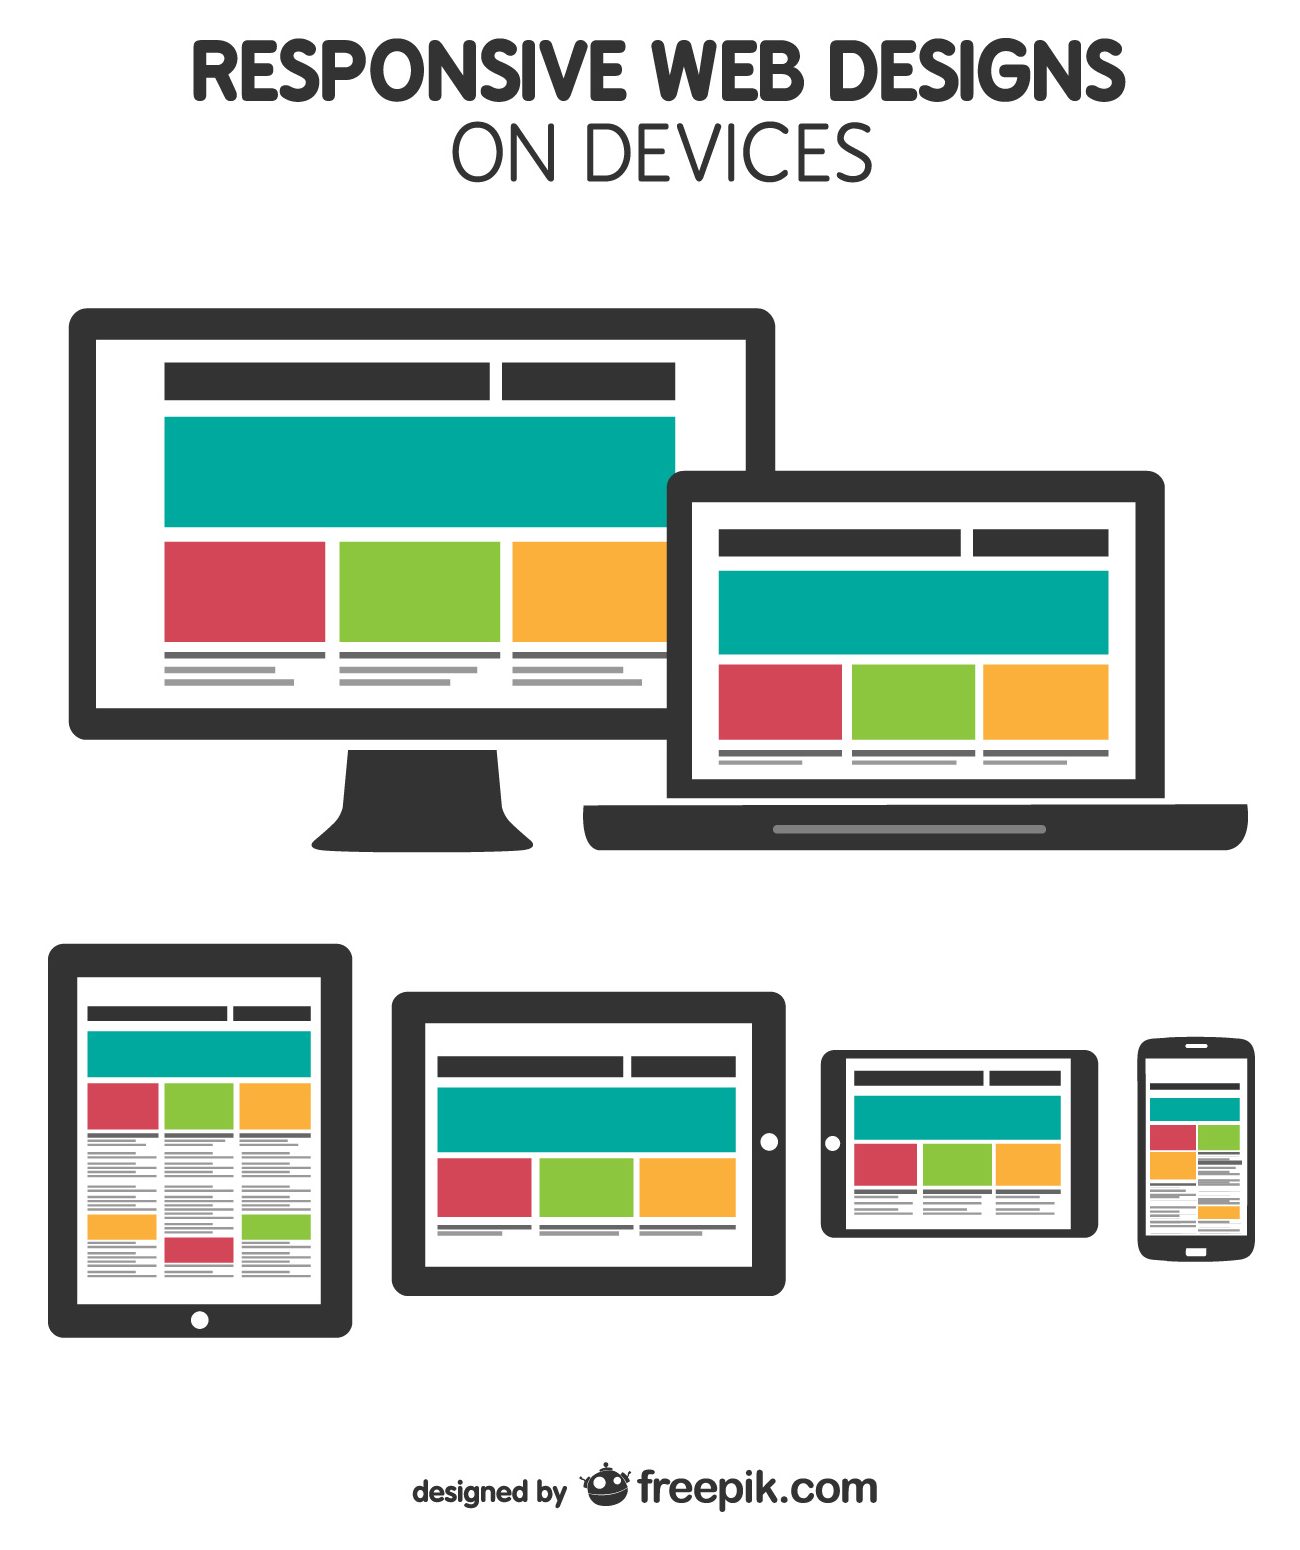 Examples of how a responsive web design would look on different devices (computer, tablet, phone).